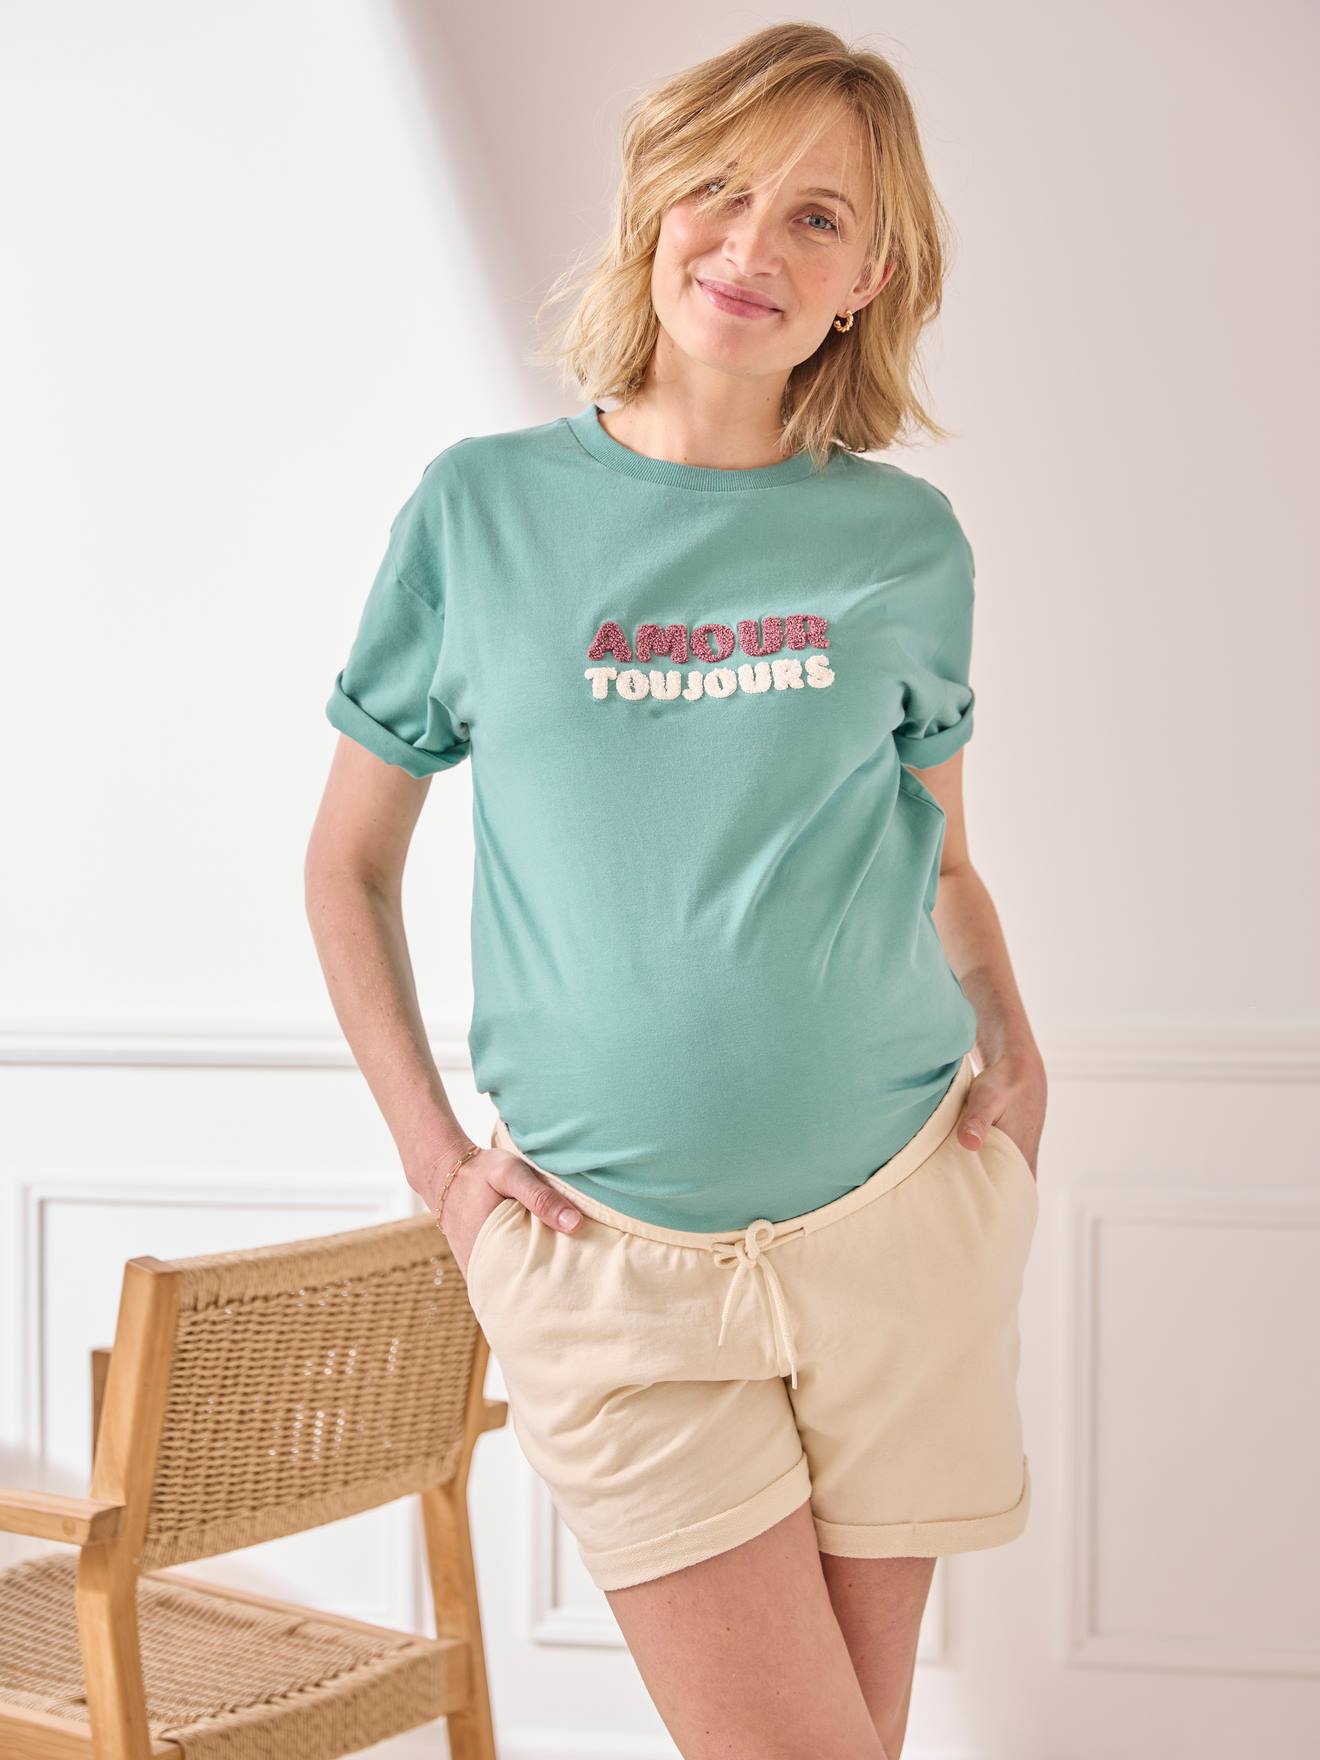 Plain T-Shirt with Message, in Organic Cotton, for Maternity mint green